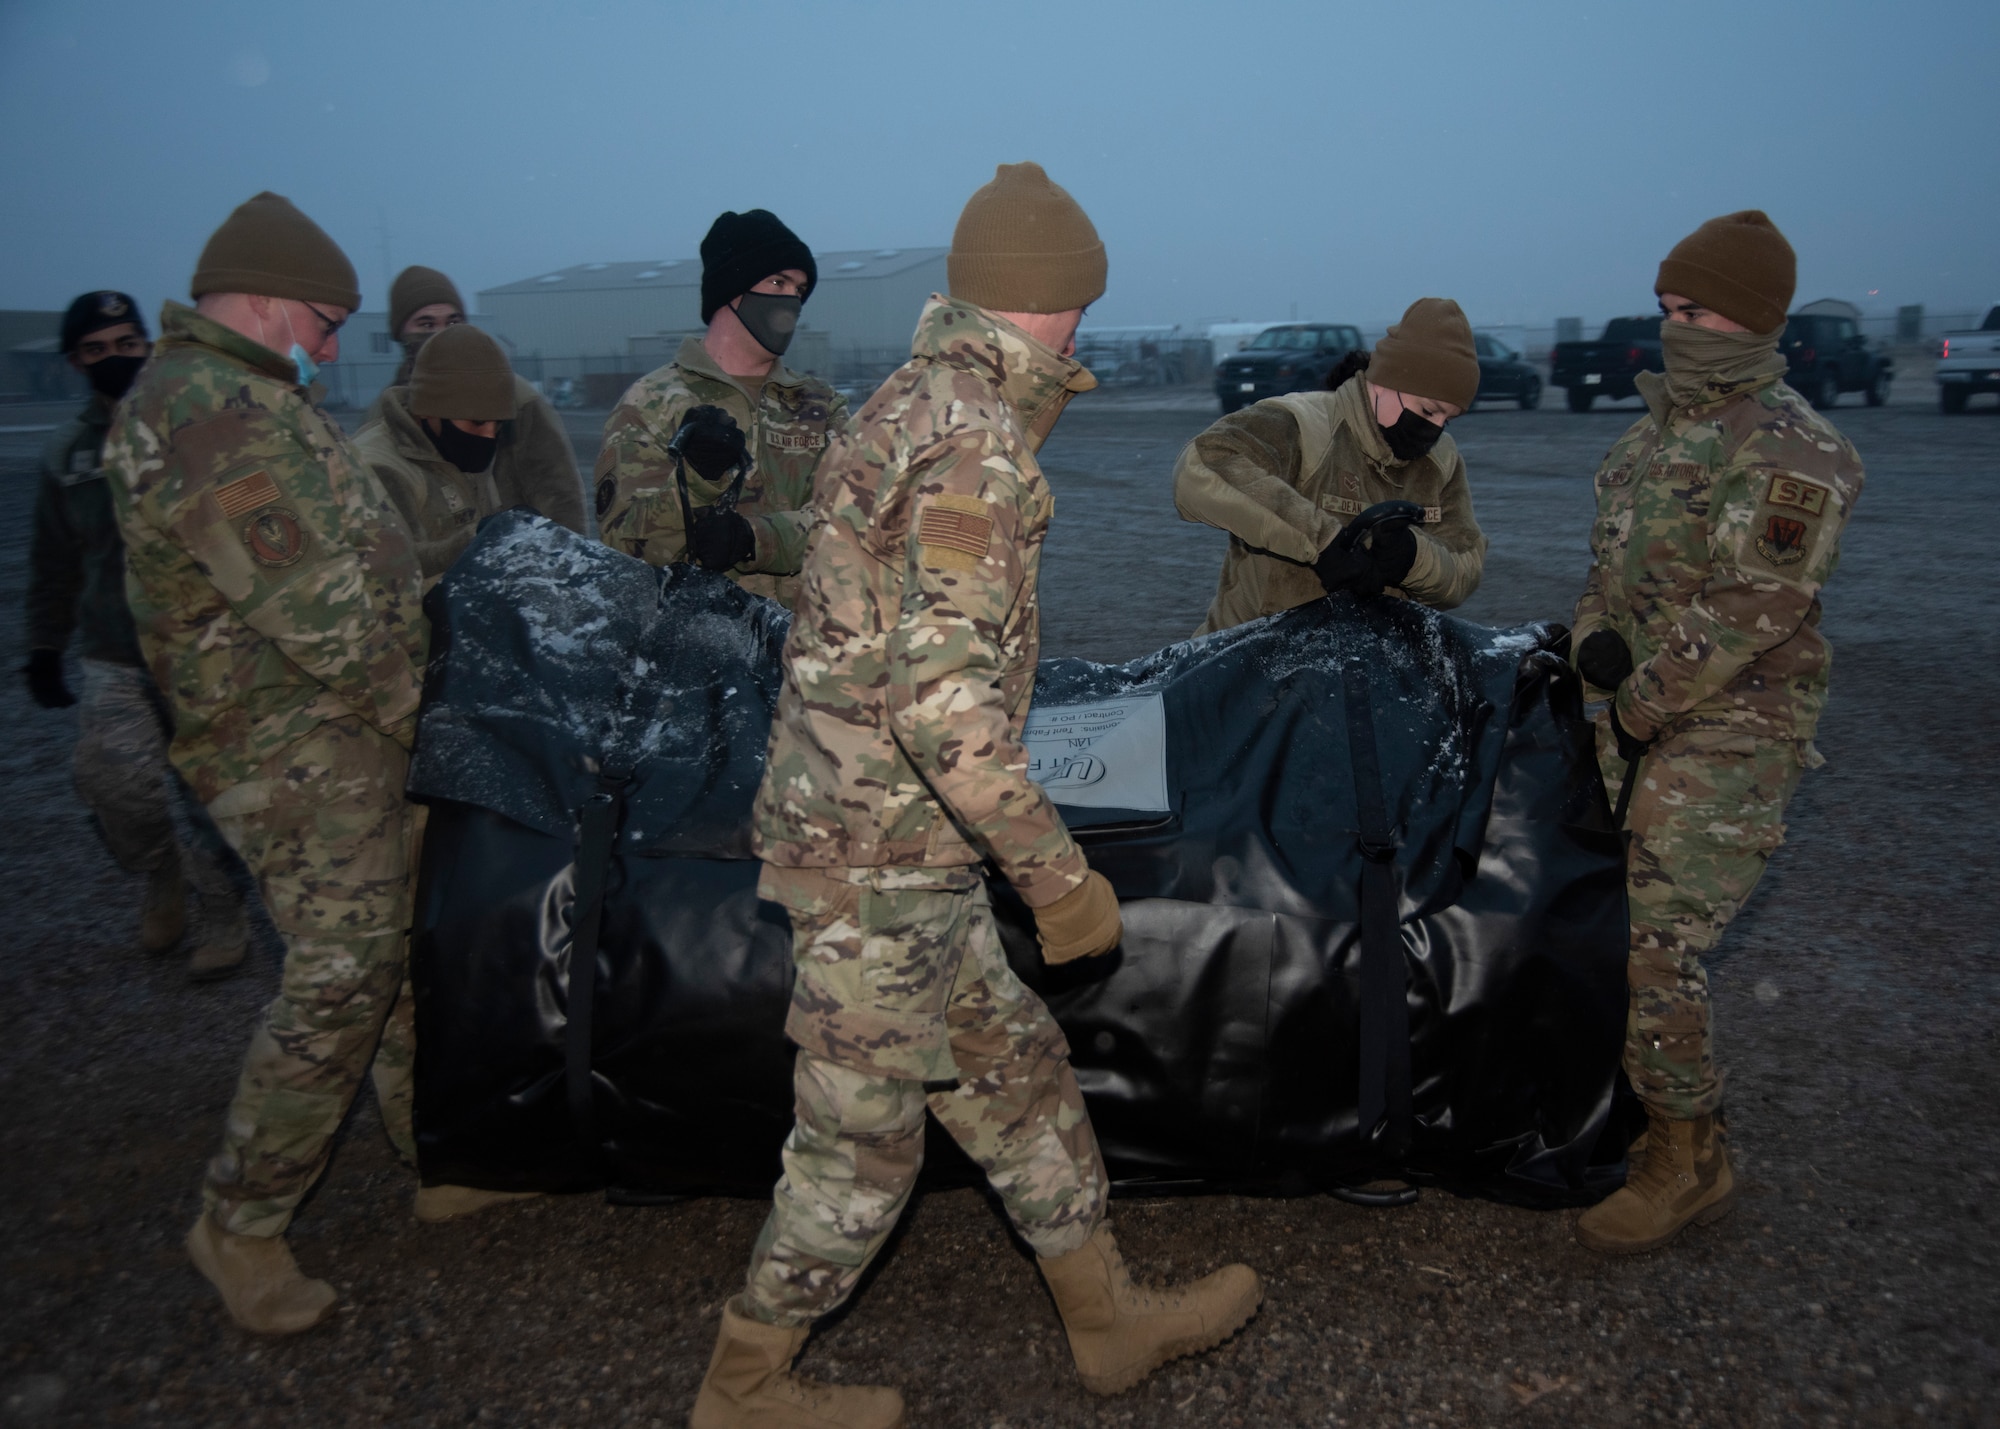 A group of Airmen lifts and a Tent Modular 60 shelter bag.